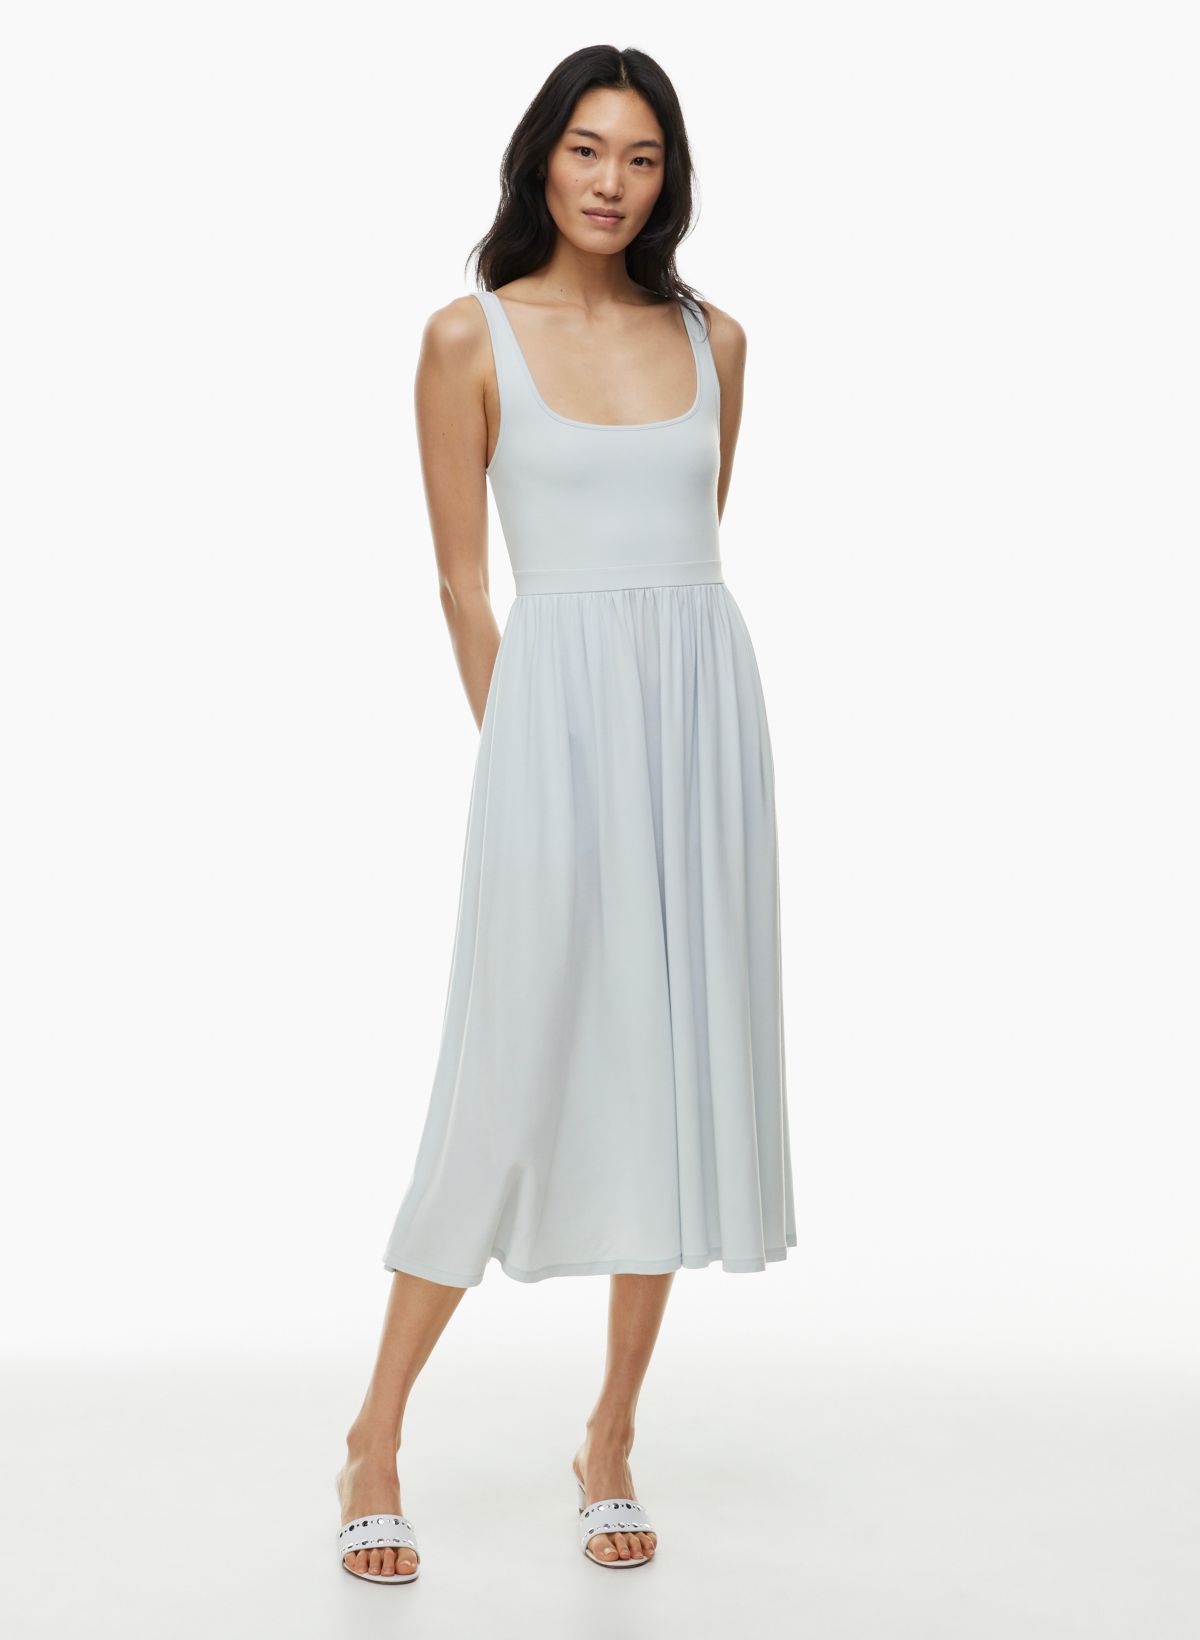 Essentials Women's Relaxed Fit Half-Sleeve Waisted Midi A-Line Dress